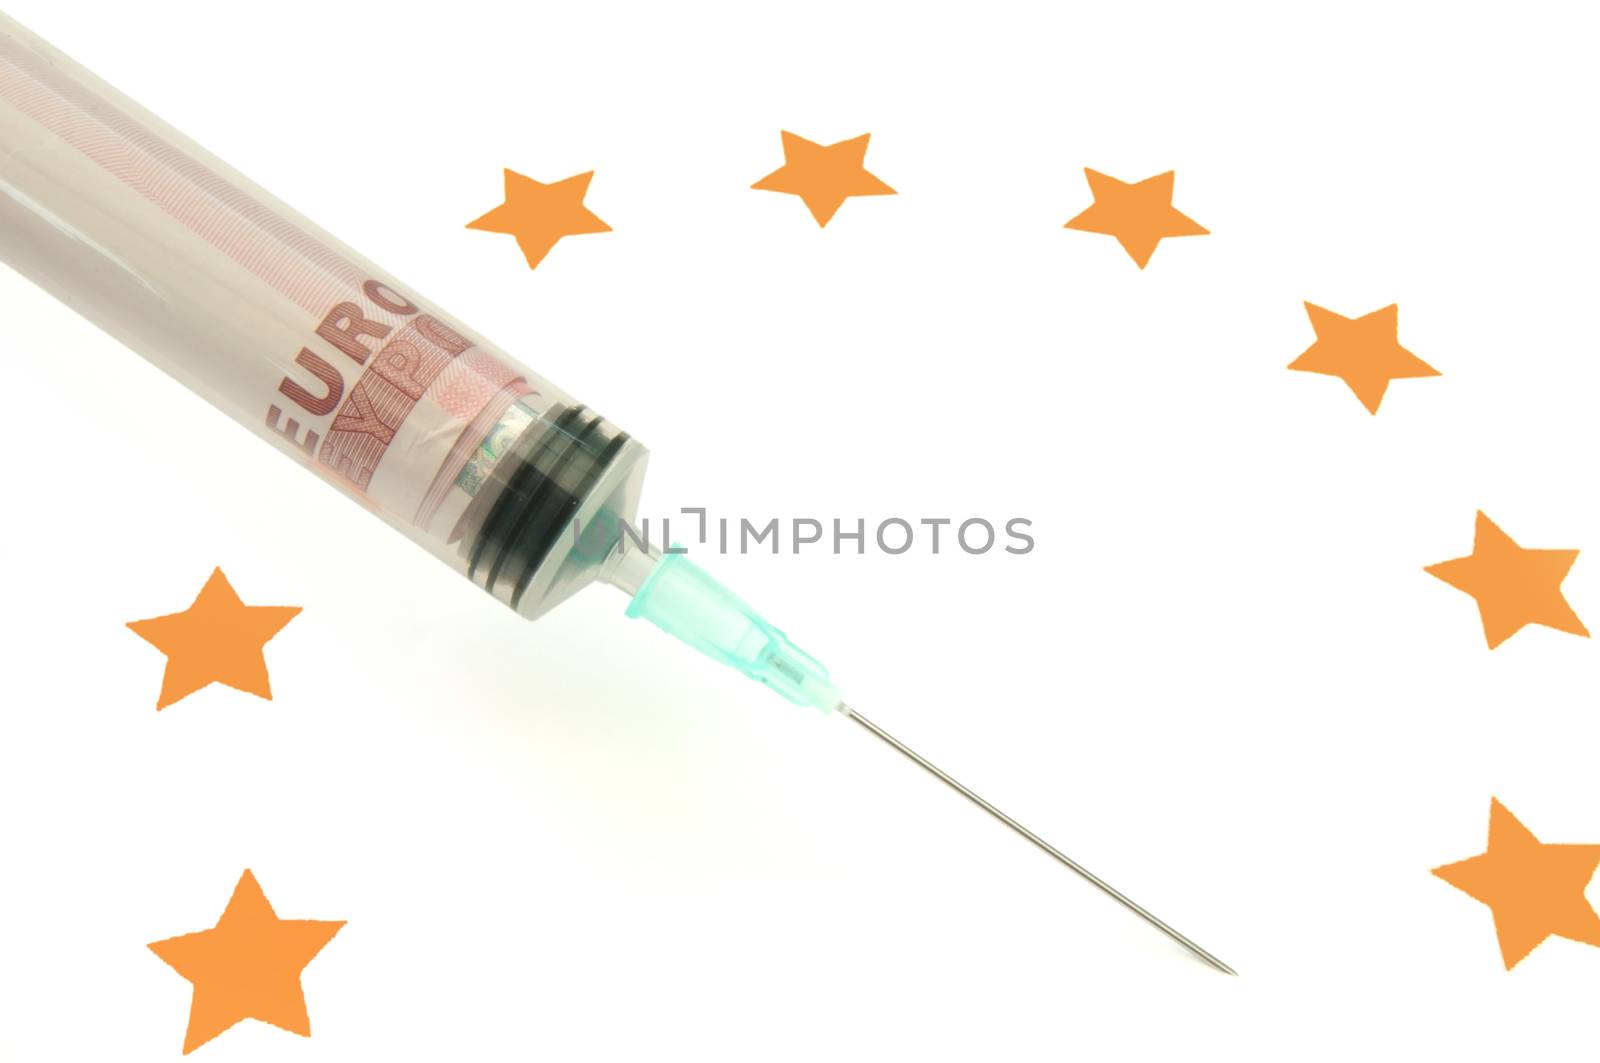 Injection needle containing banknotes placed inbetween the Euro symbol of stars 